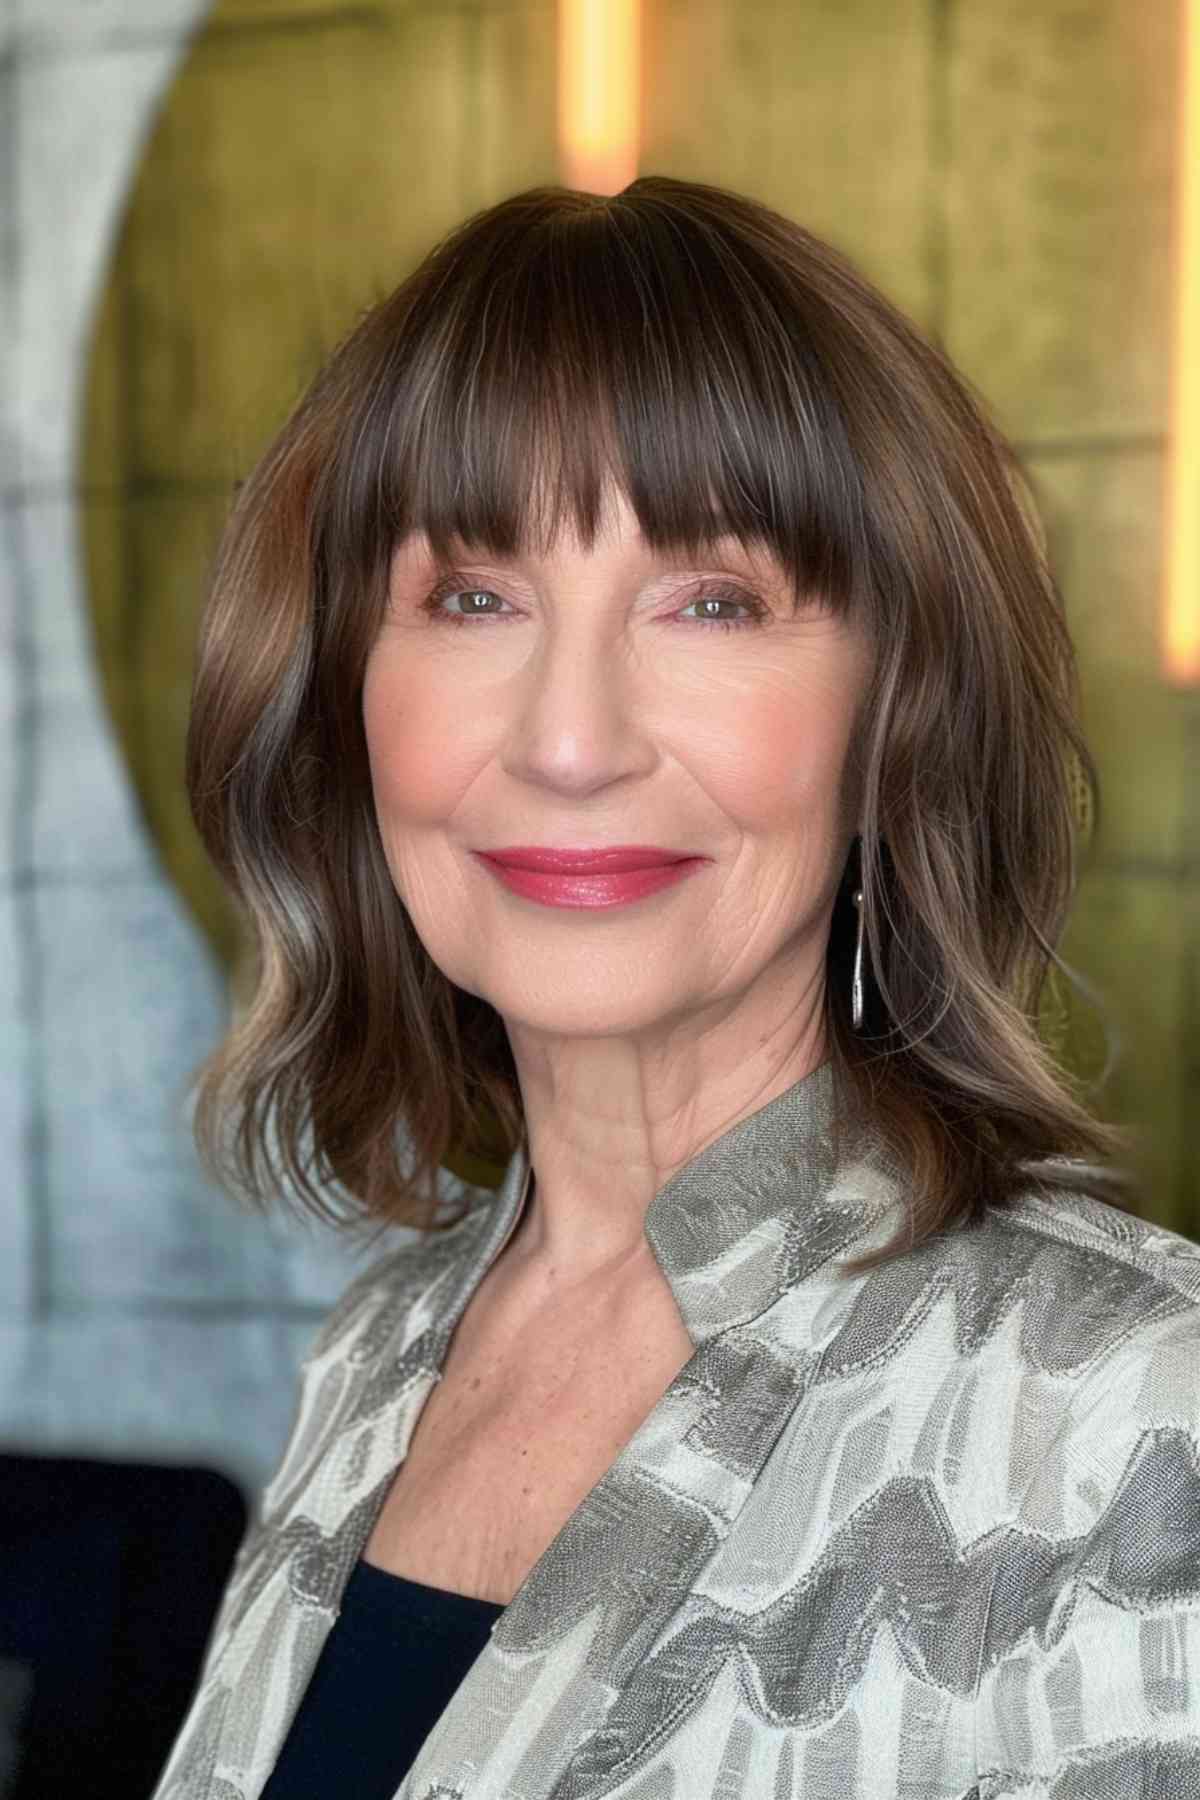 Mature woman with thick, straight bangs and a shoulder-length bob, smiling in a patterned blouse.